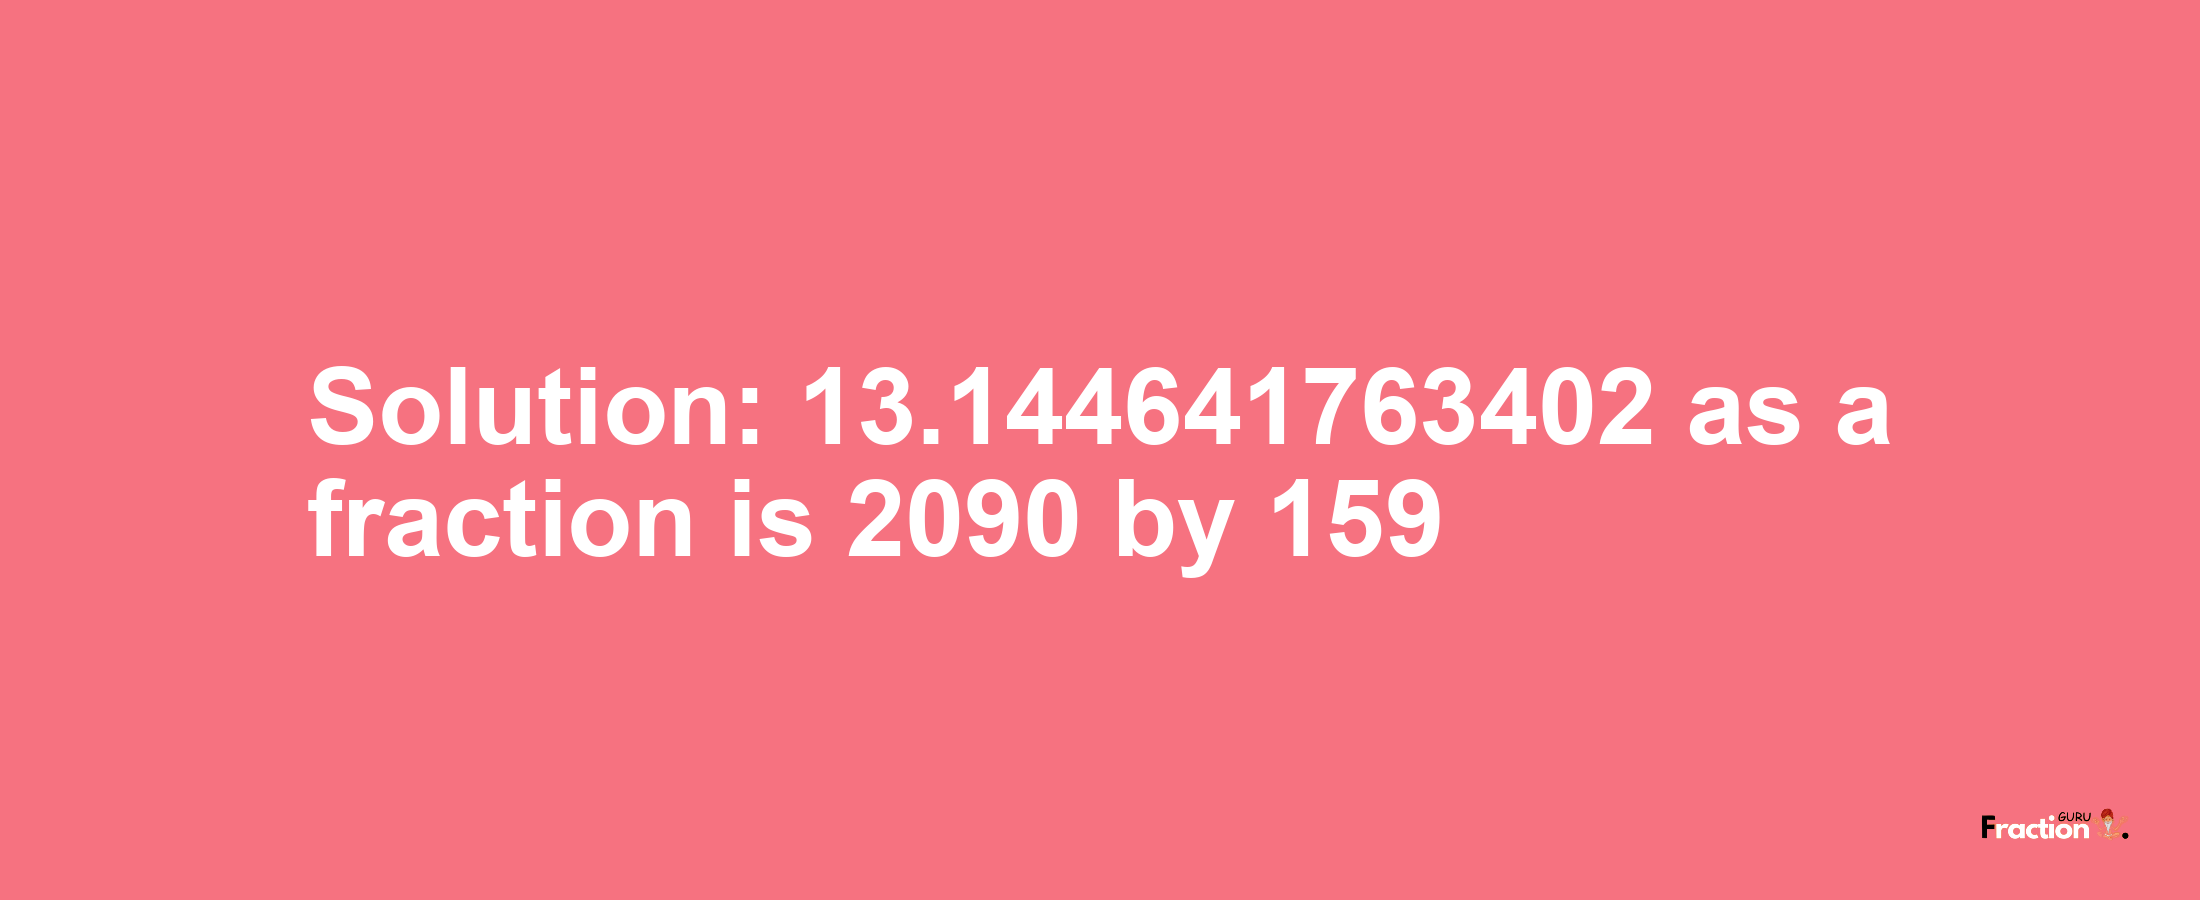 Solution:13.144641763402 as a fraction is 2090/159